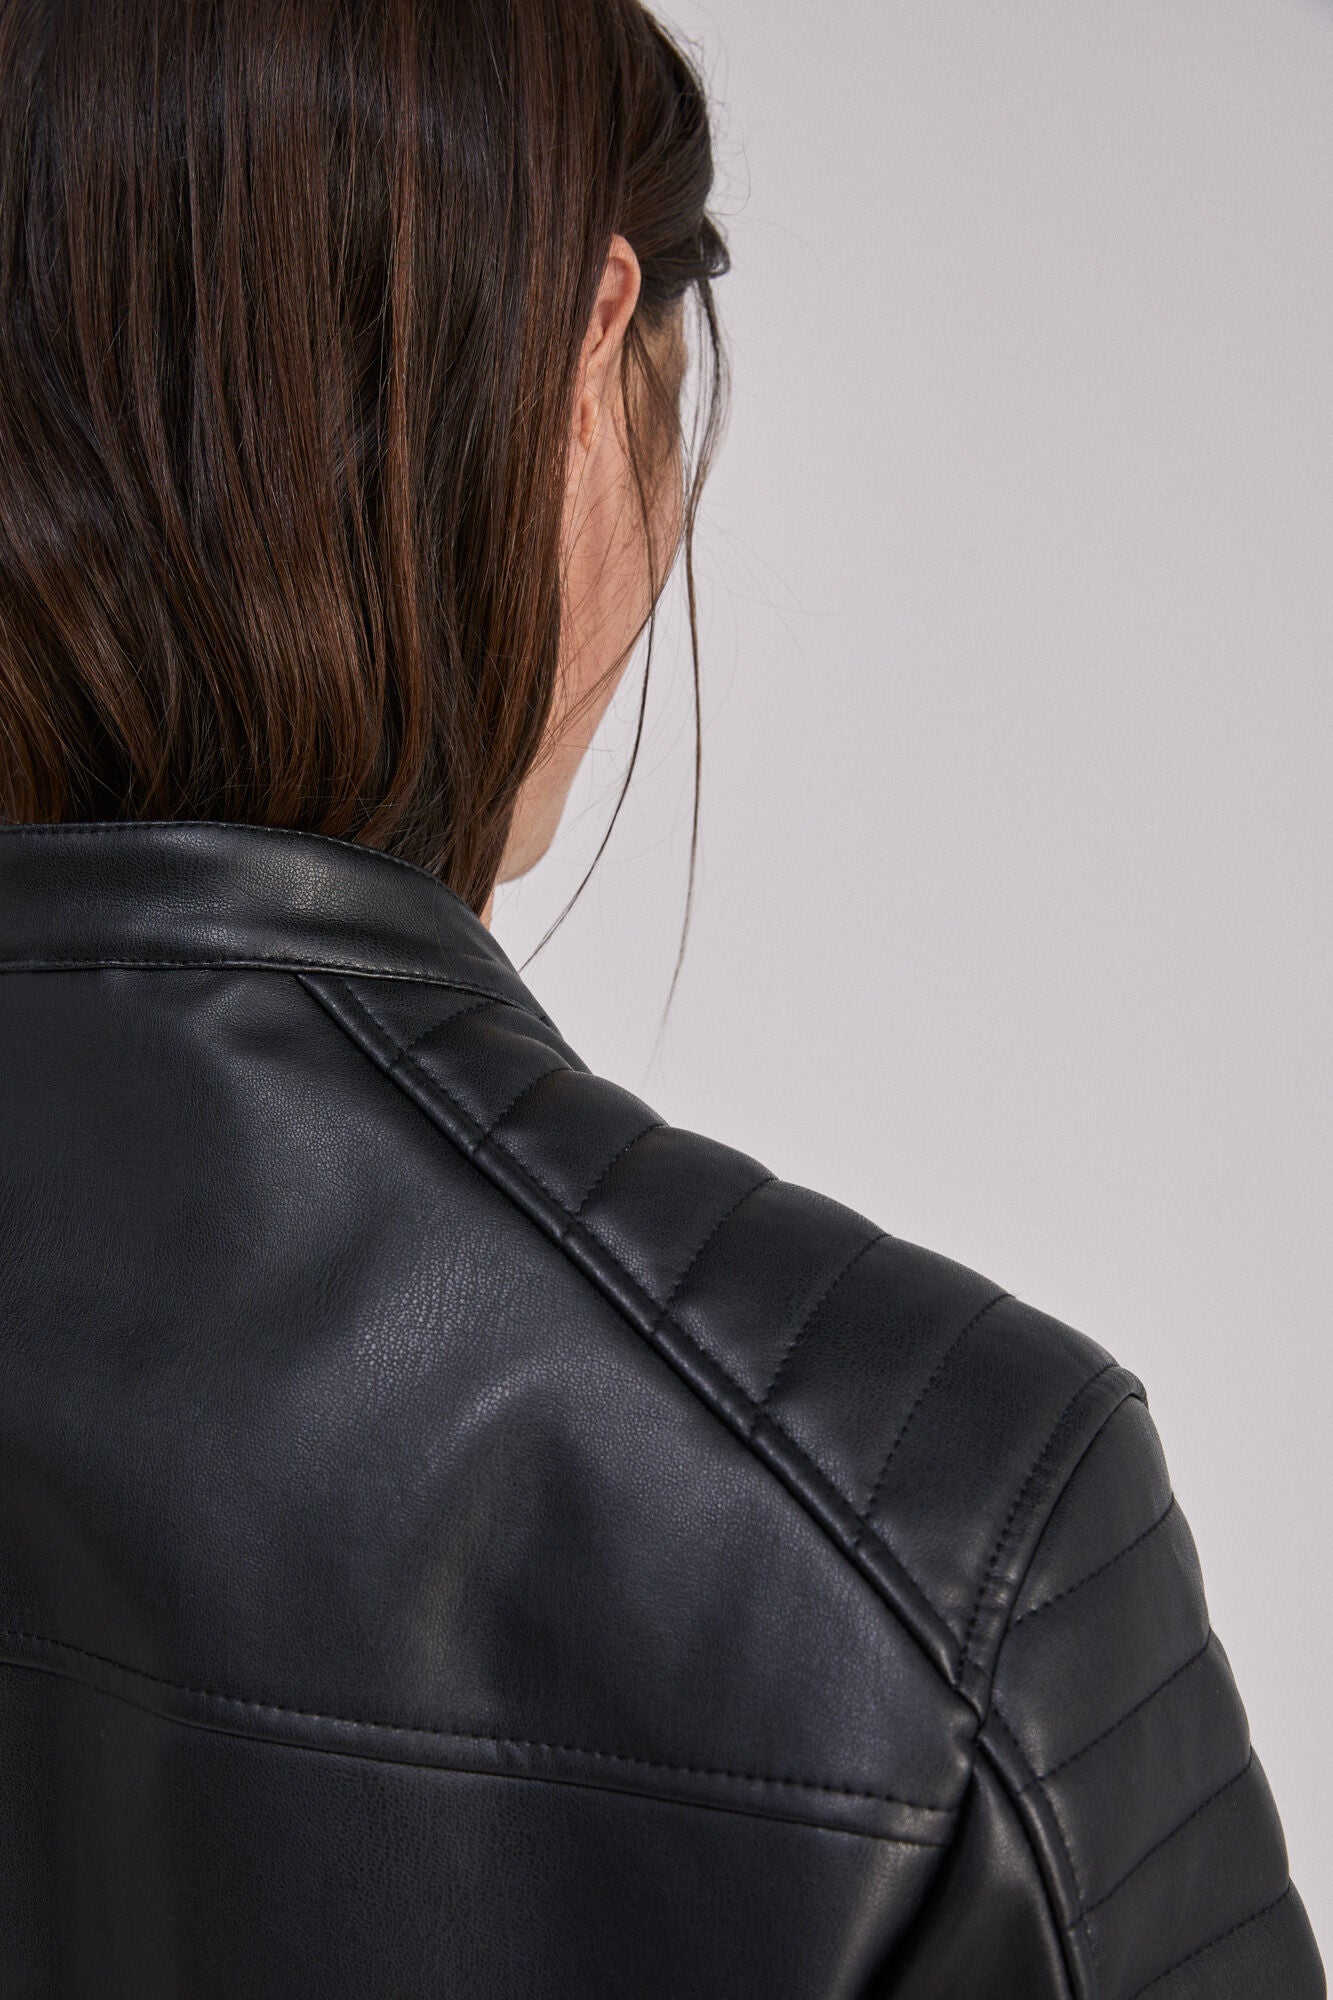 Faux leather biker jacket with hood